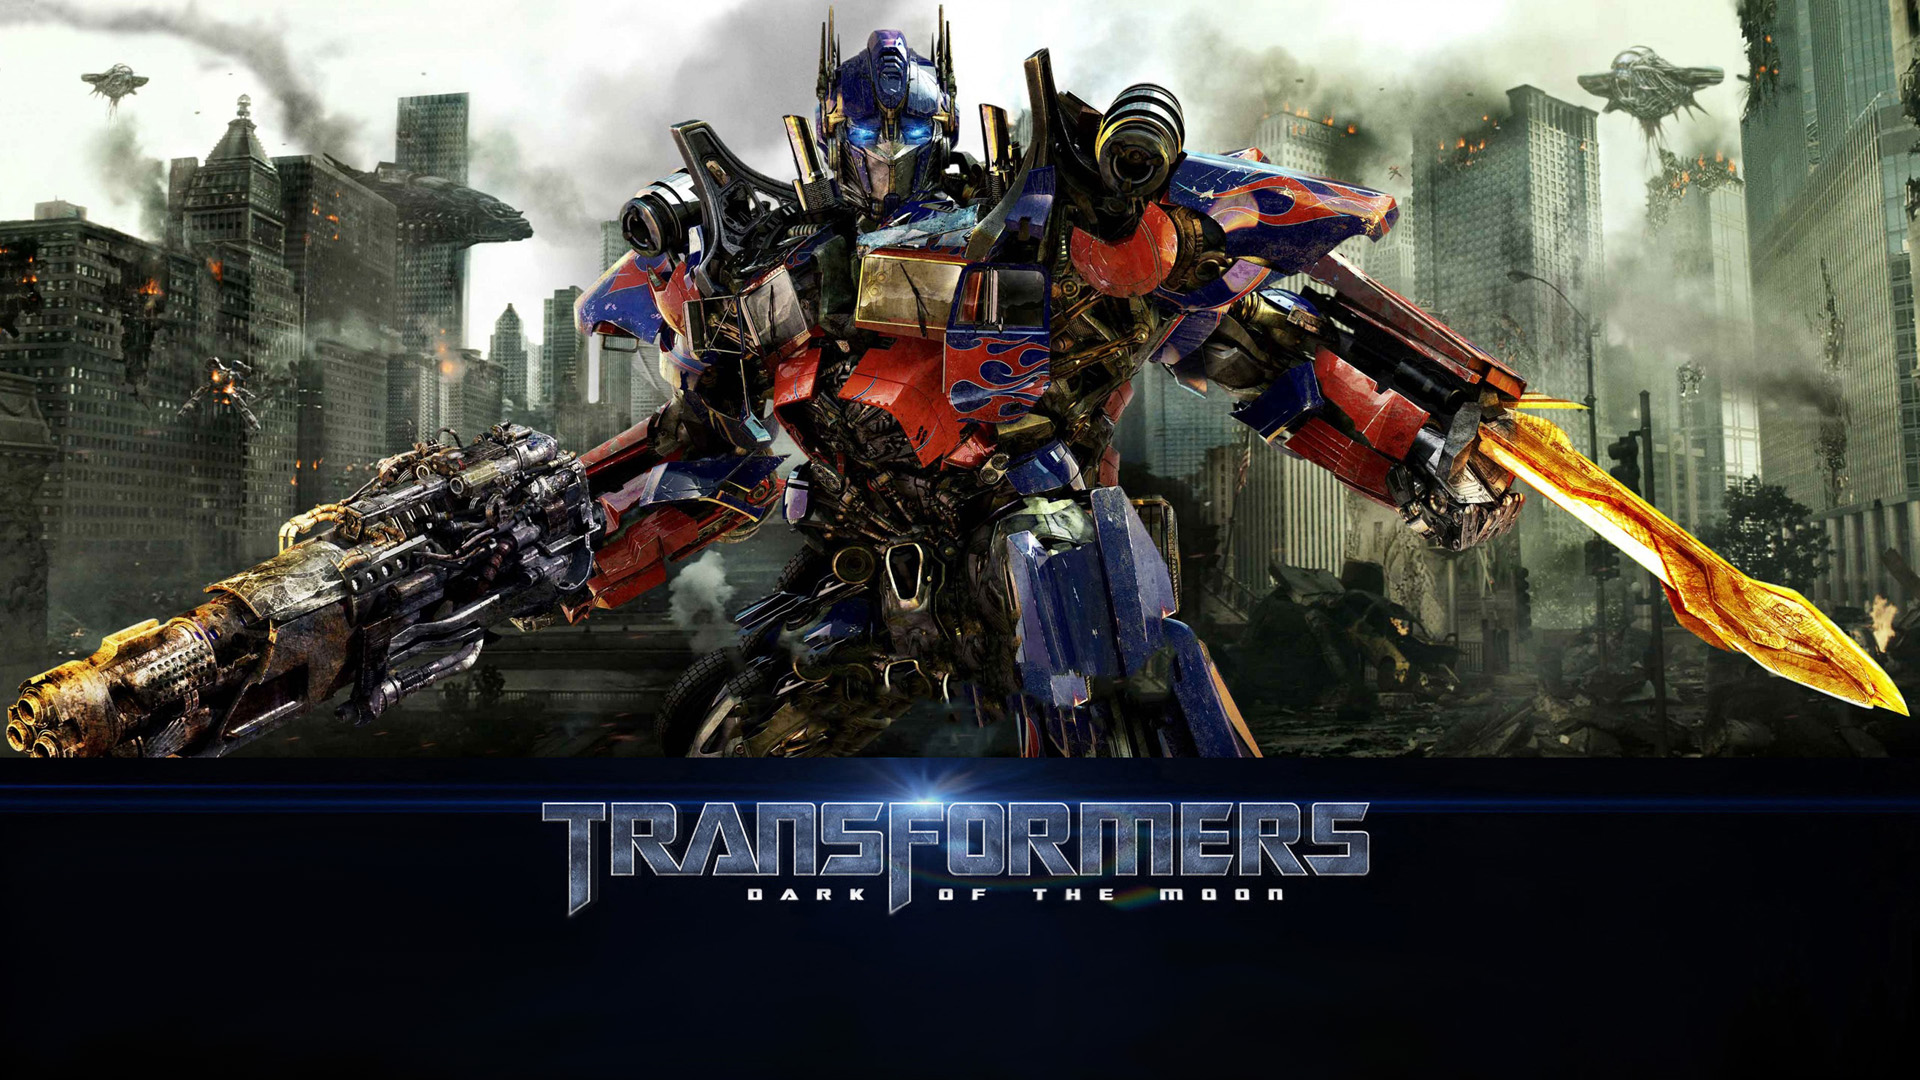 Hd transformers dark of the moon wallpapers 3d hd pictures.